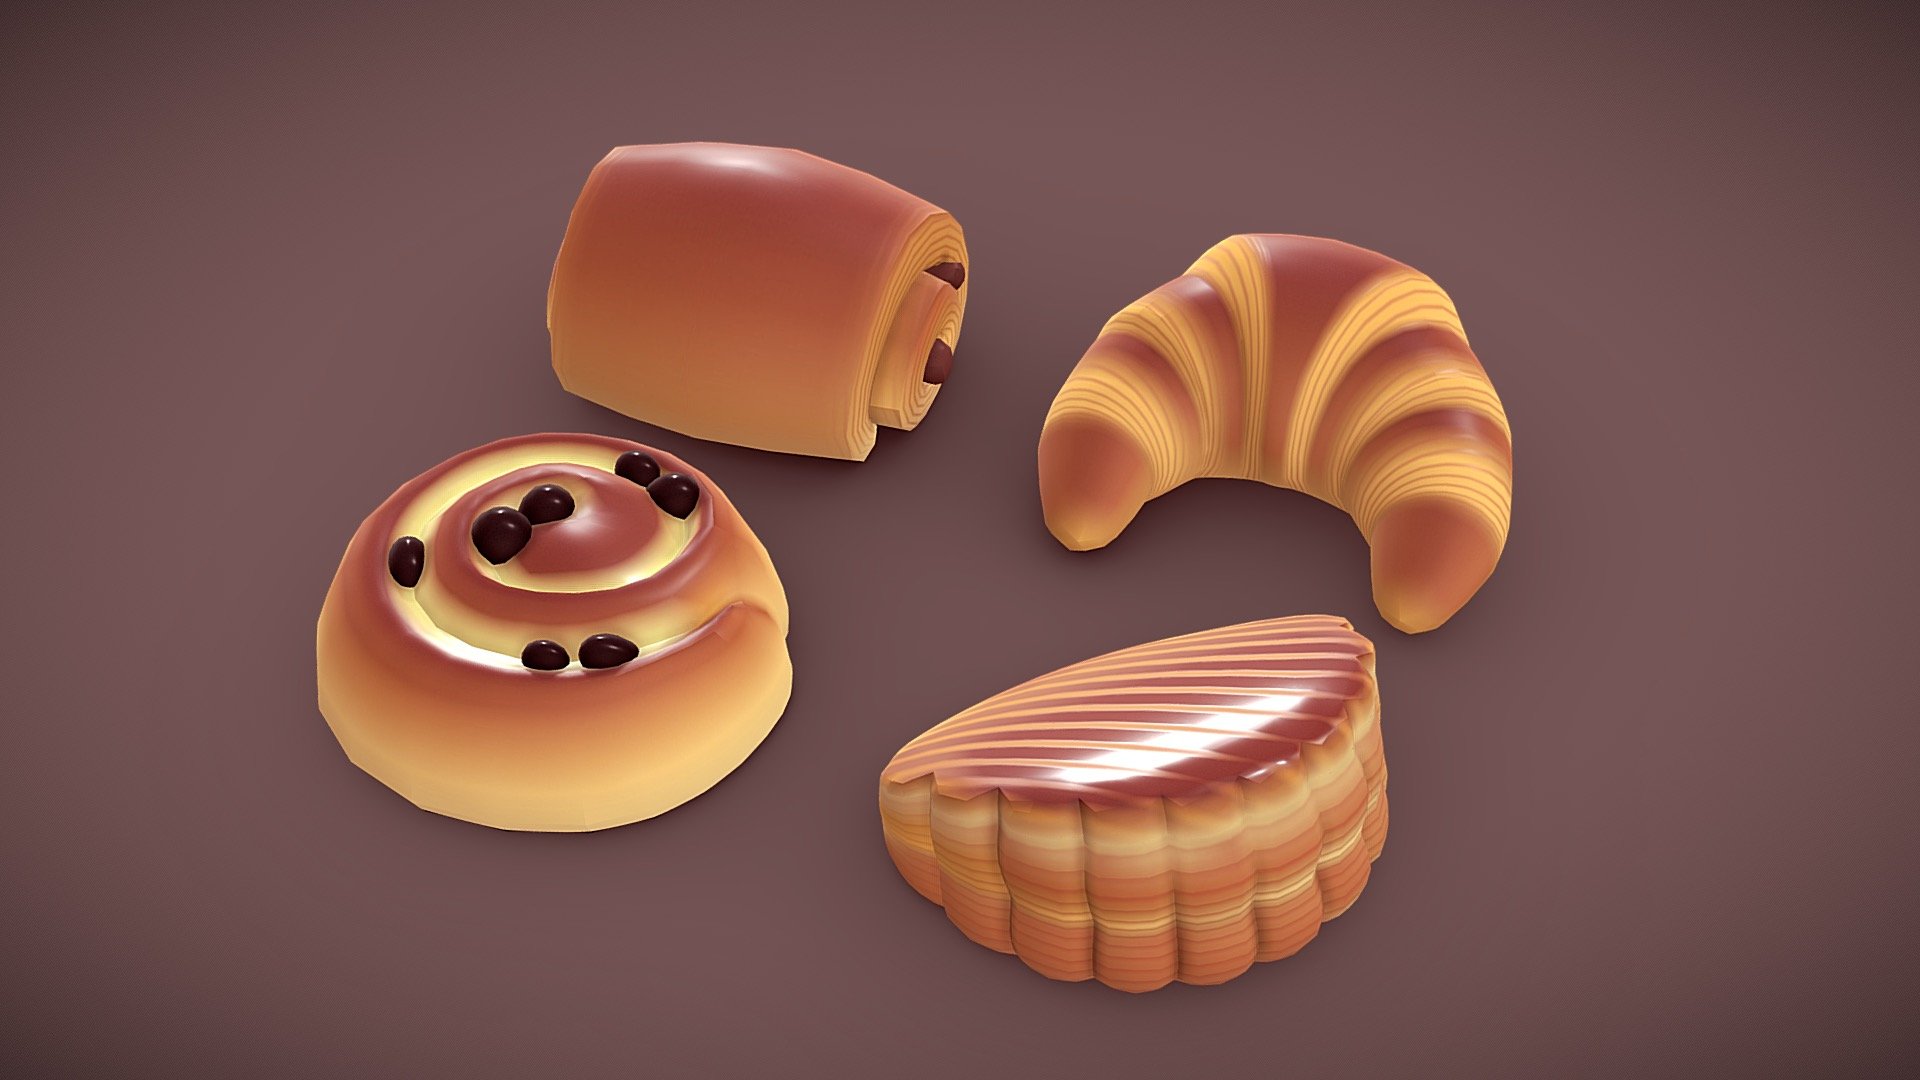 French Pastry Stylized lowpoly ready for subdiv.

Croissant, chocolatine, pain aux raisins, chausson aux pommes.

1024x1024 texture. Diffuse/Roughness/Specular 3d model